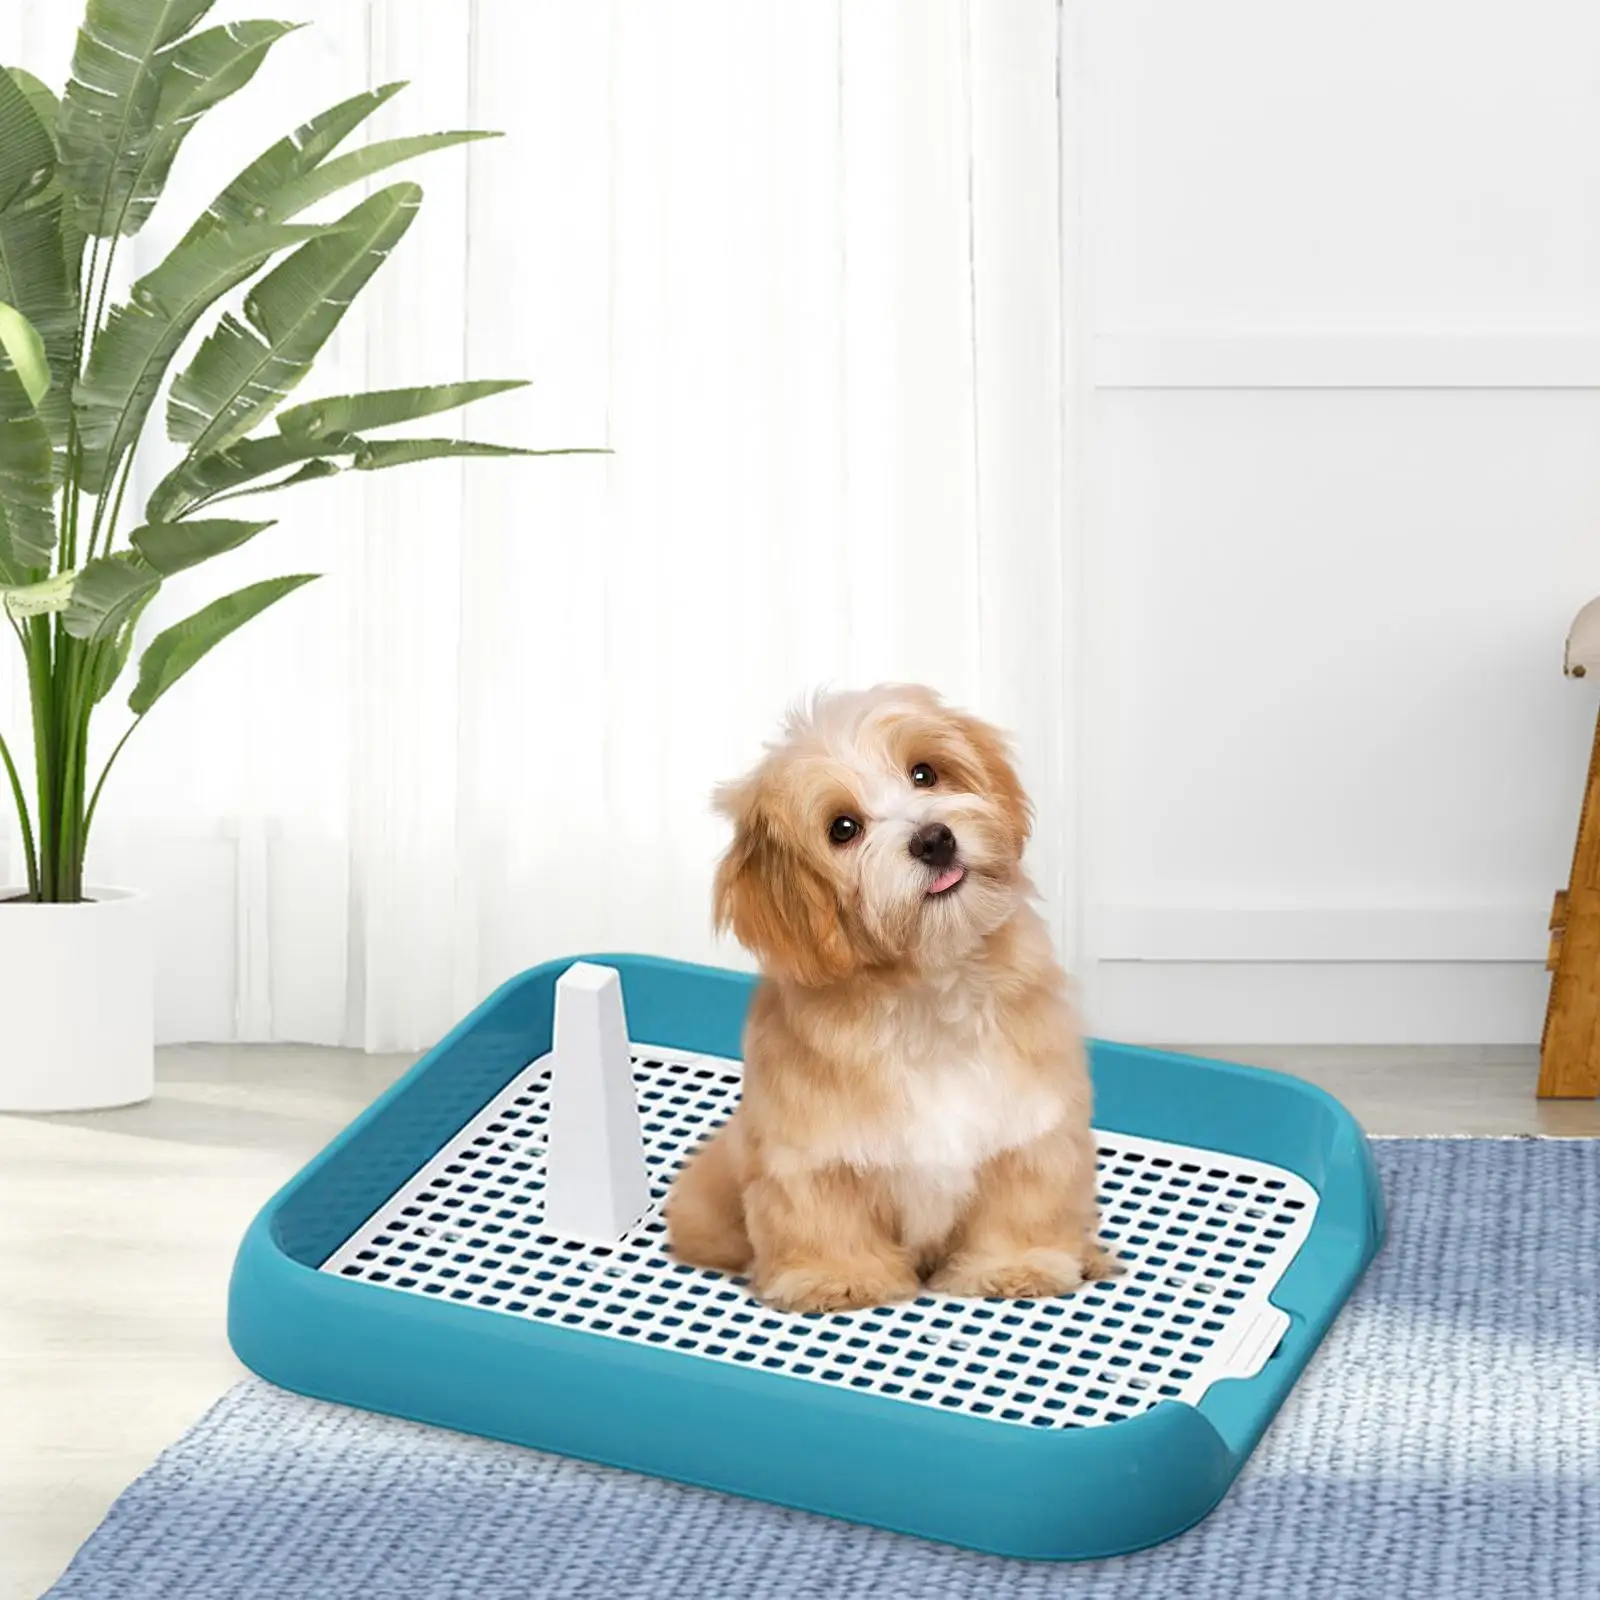 Training Pads Toilet for Puppy Portable Cat Litter Box for Small and Medium Dogs, Bunny, Cats